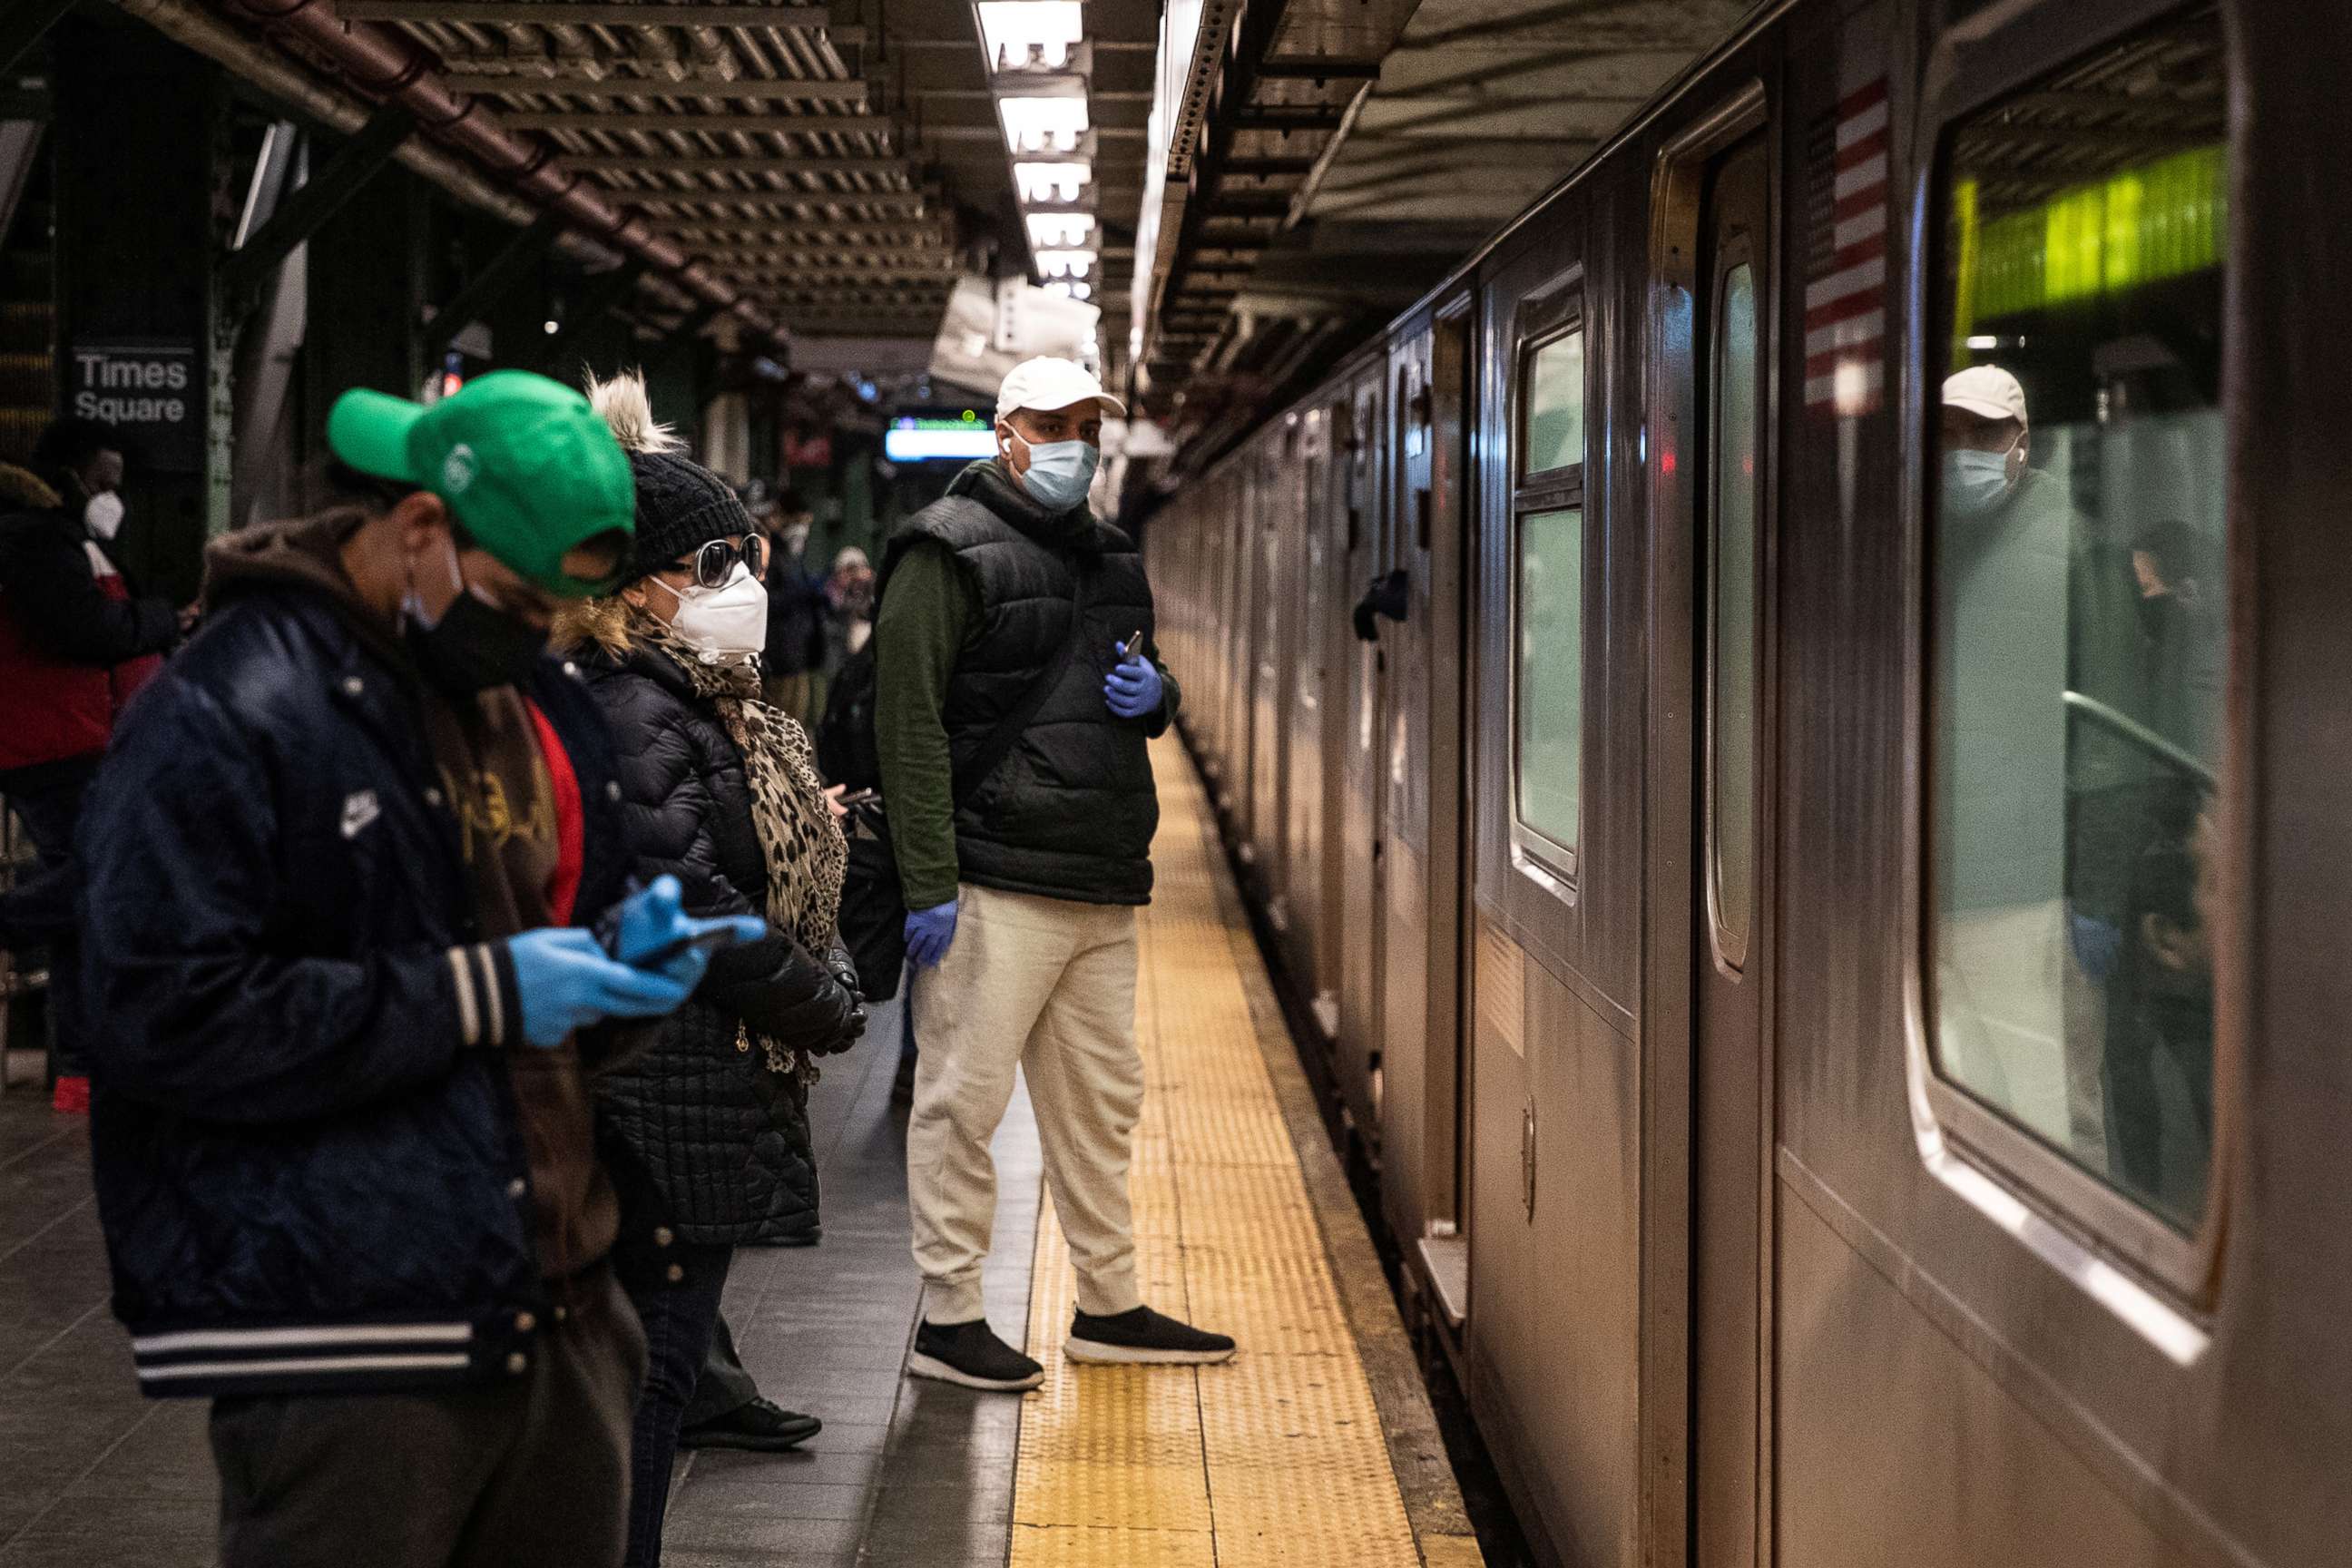 PHOTO: In this April 17, 2020, file photo, people stand on the platform in the Times Square subway station in New York.